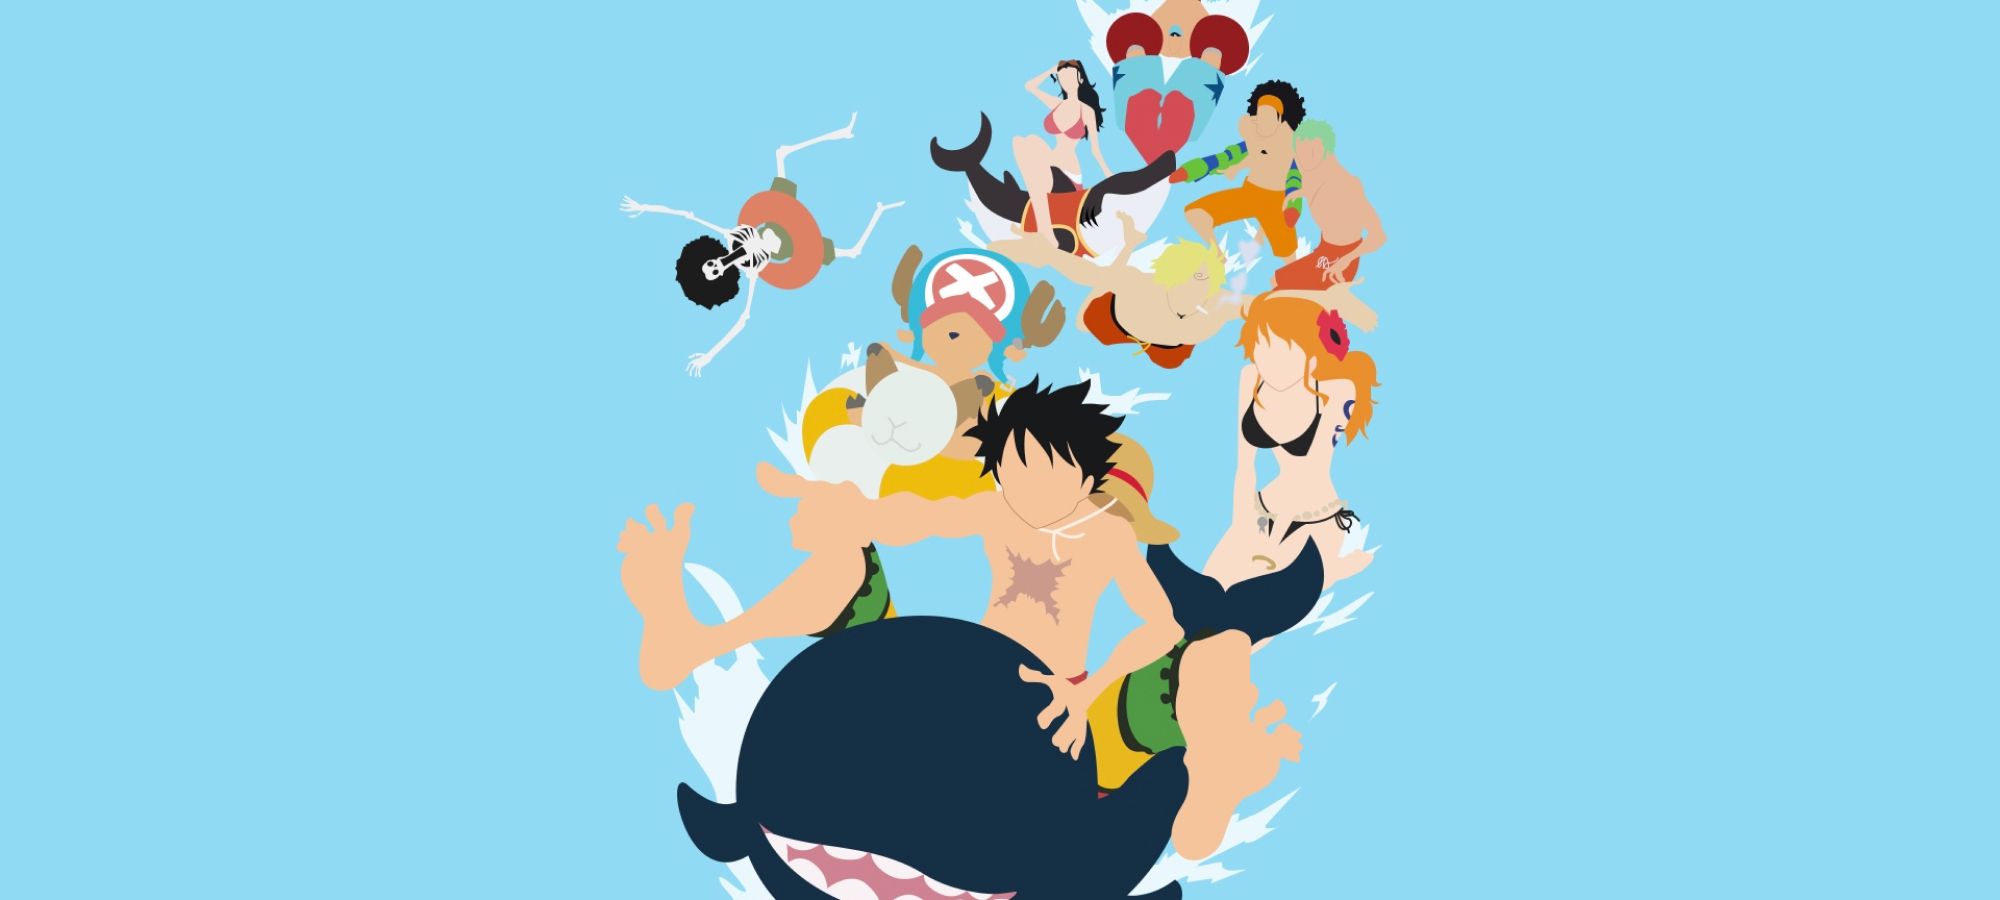 wallpaper-personnages-one-piece